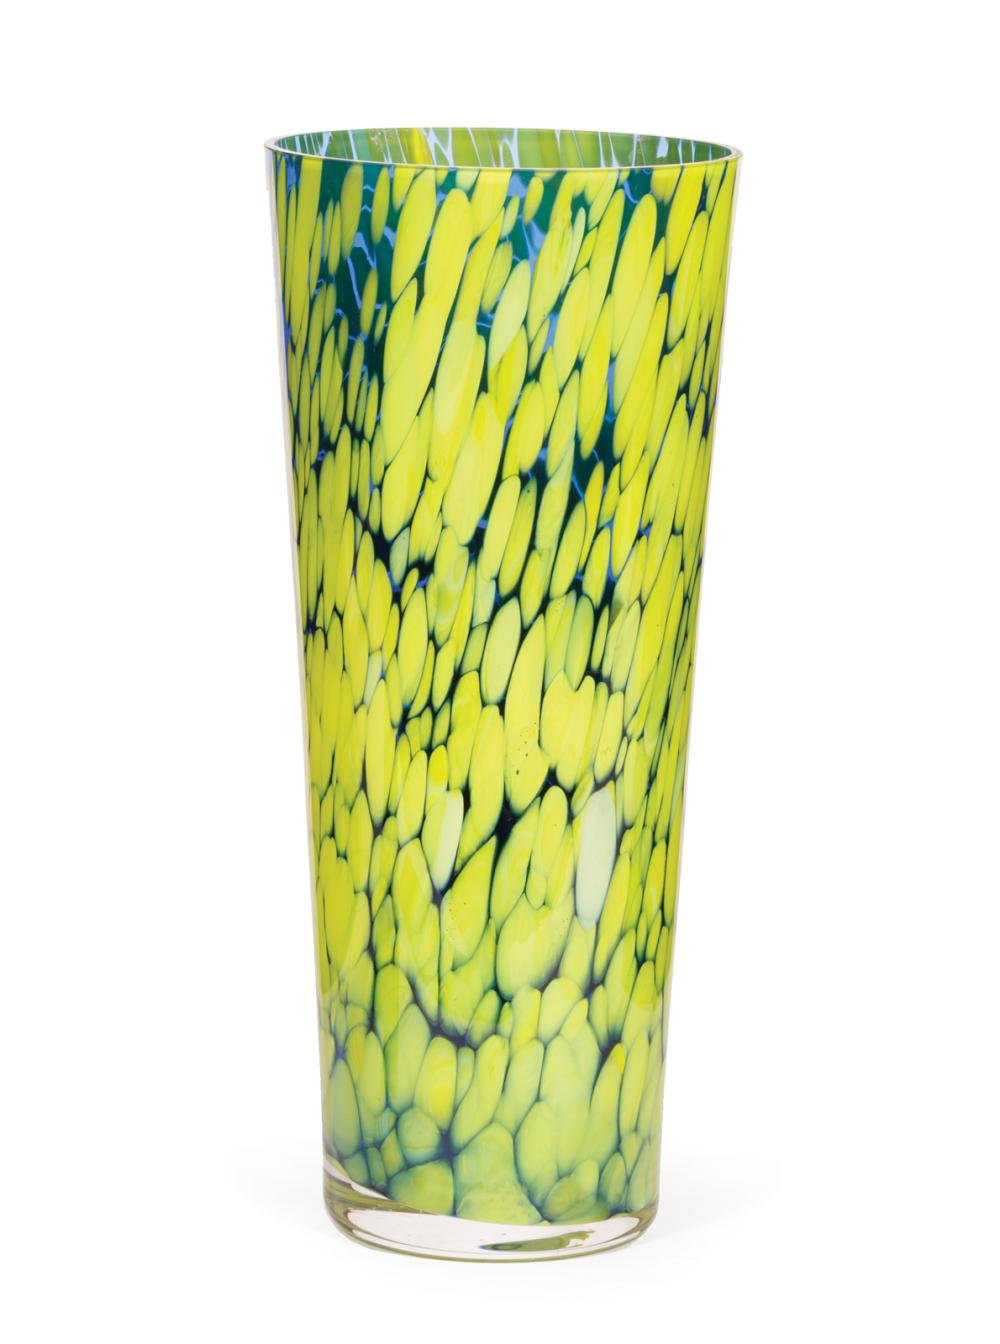 ART GLASS YELLOW AND BLUE VASEArt 318fe4